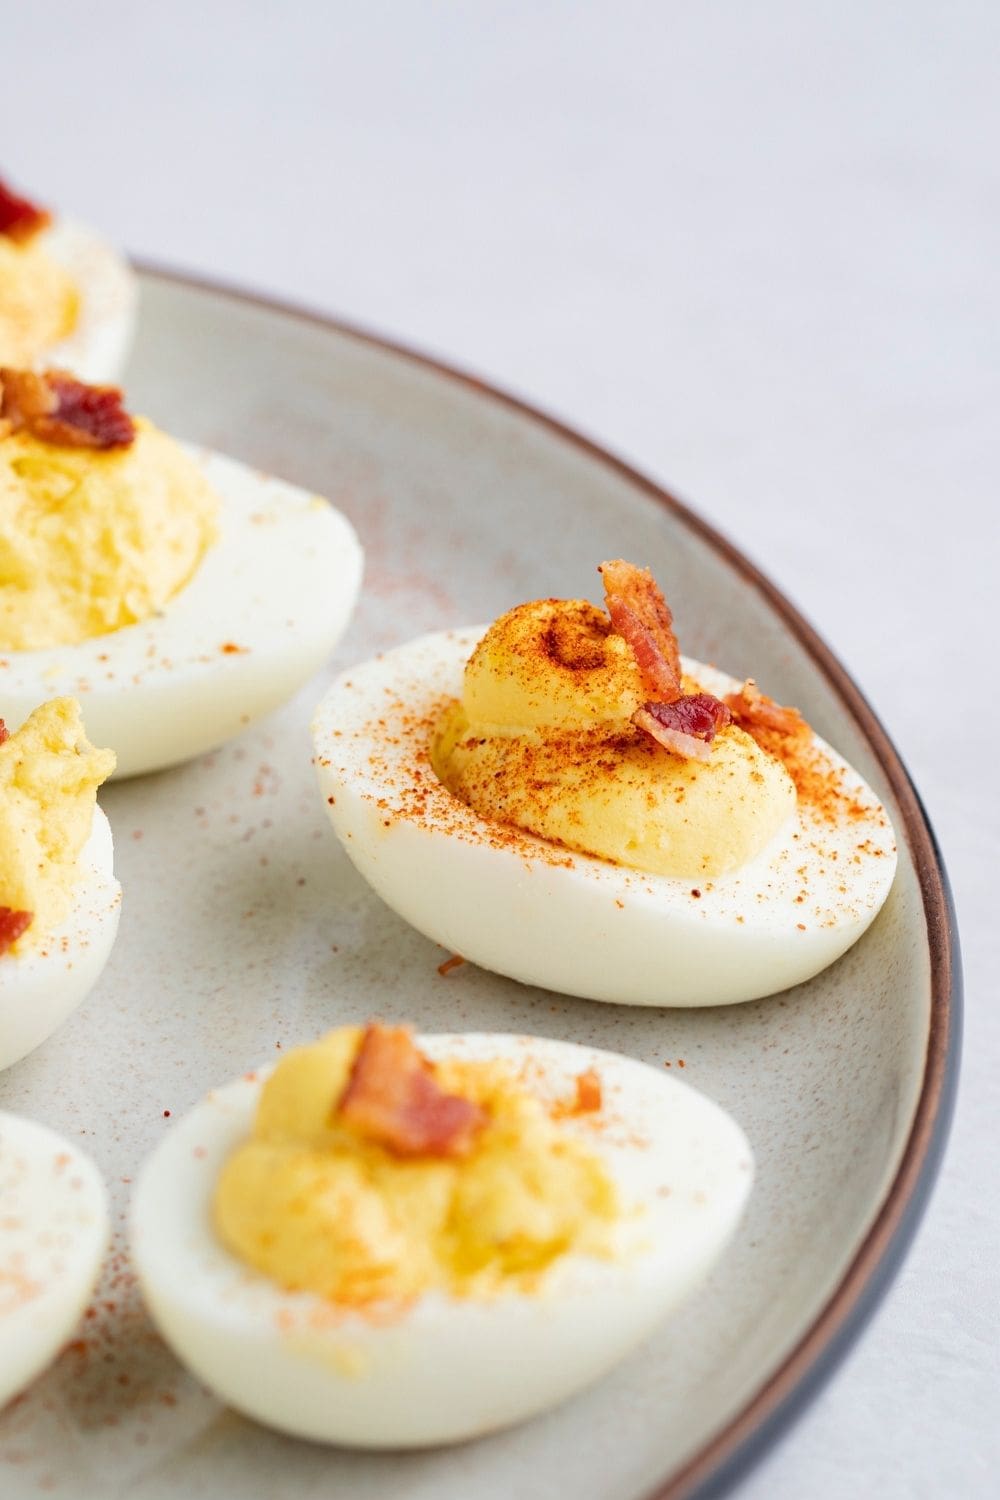 Homemade Deviled Eggs with Paprika and Bacon Crumbles